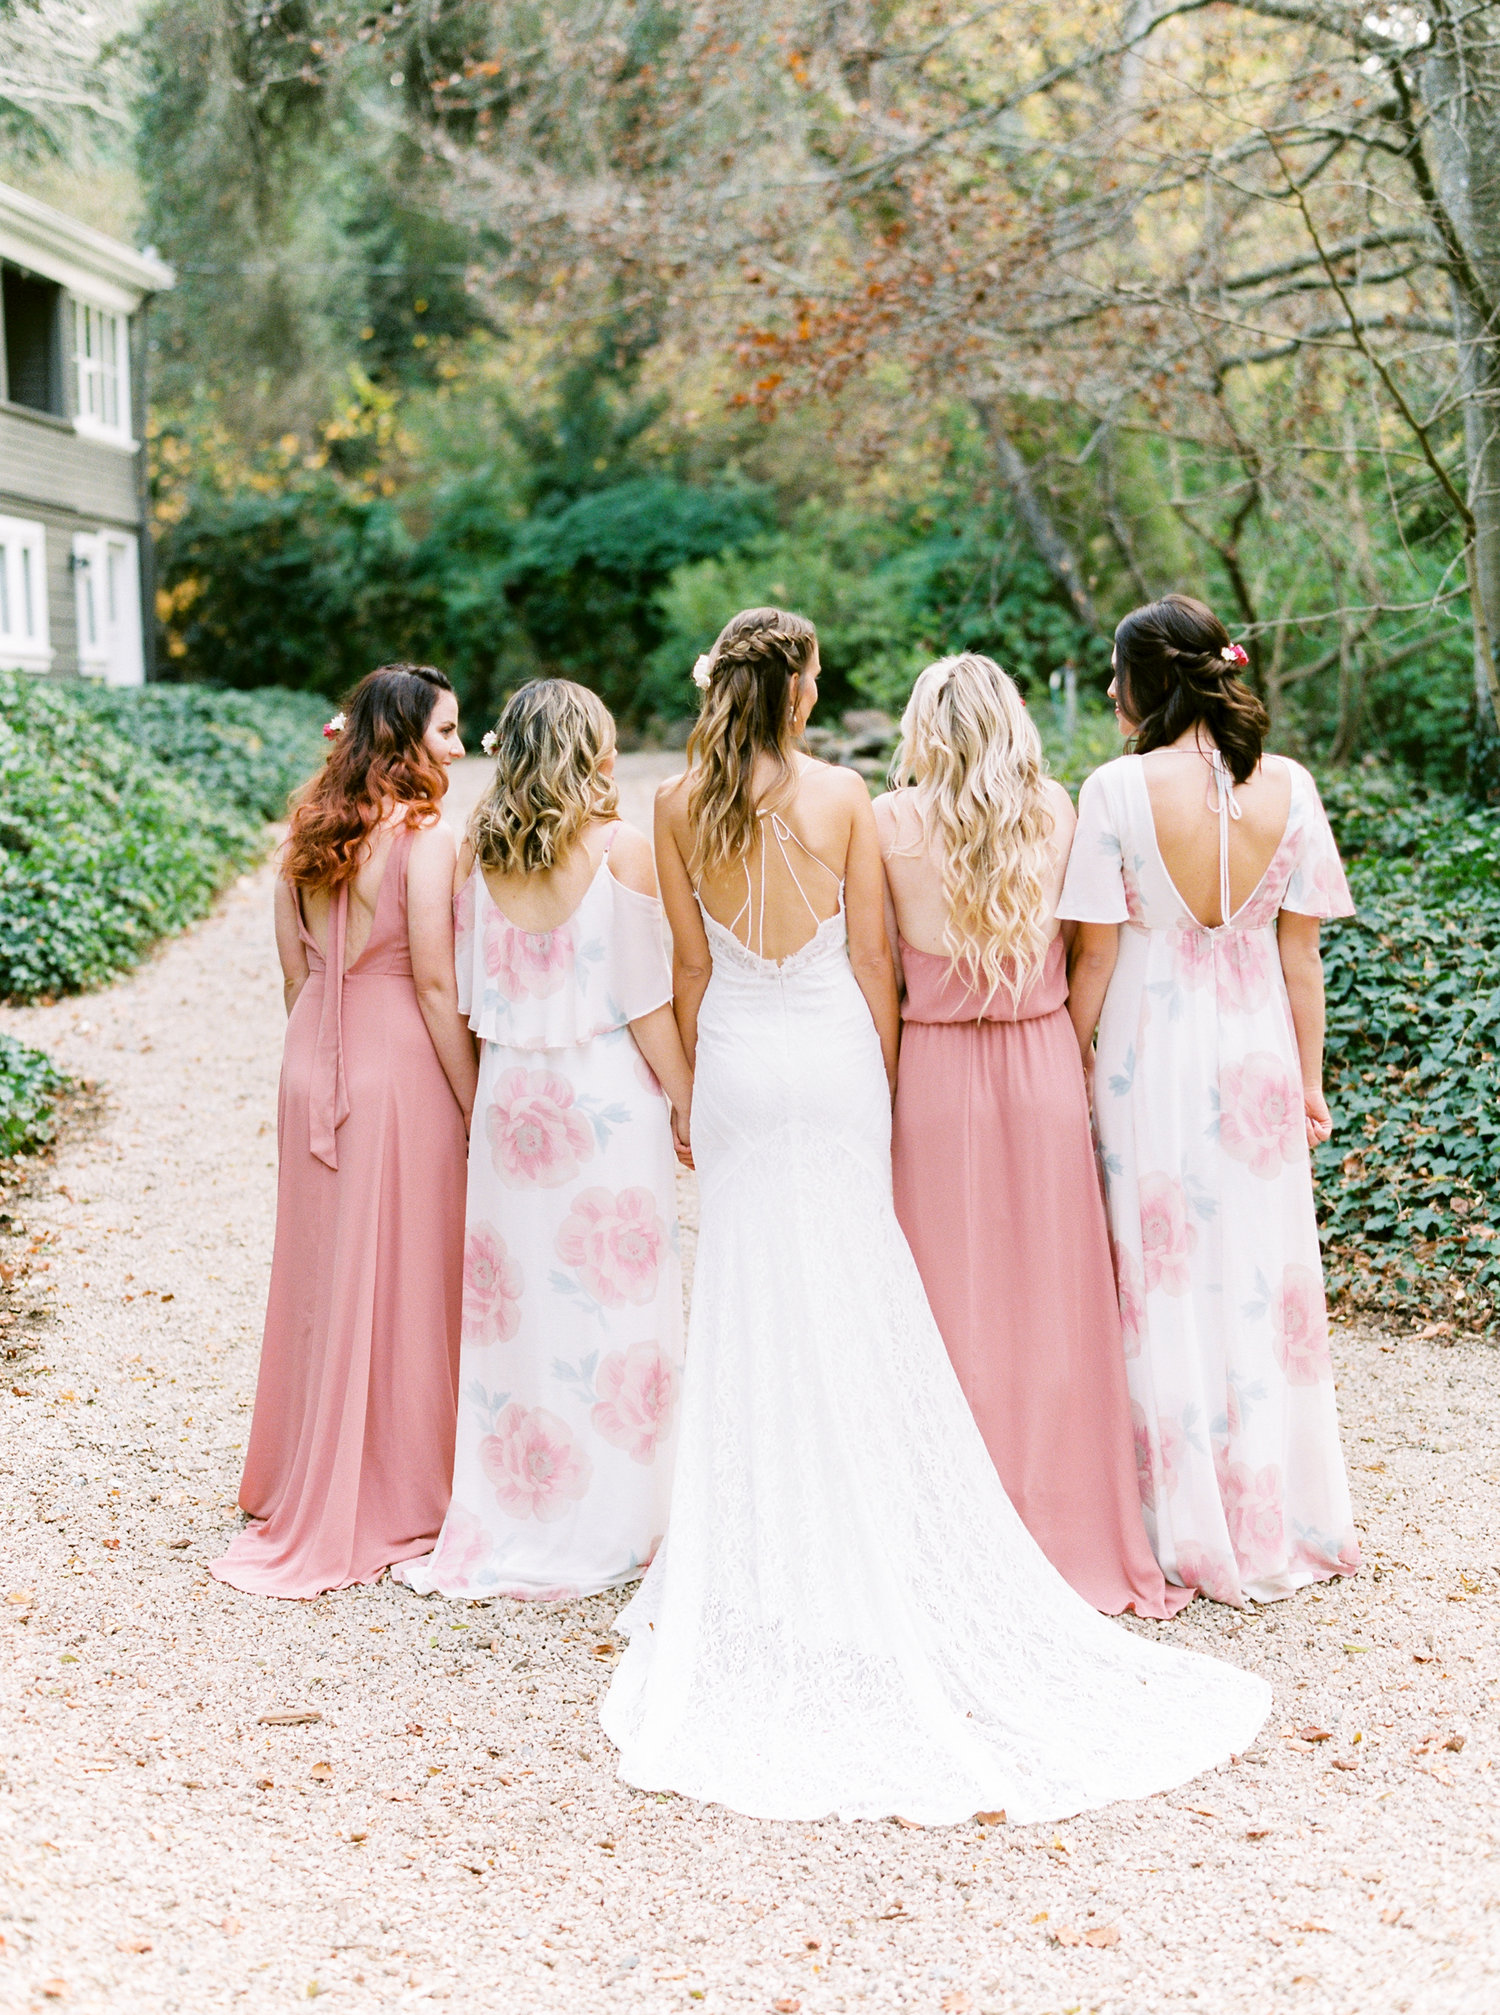 Mismatched blush and floral bridesmaid dresses